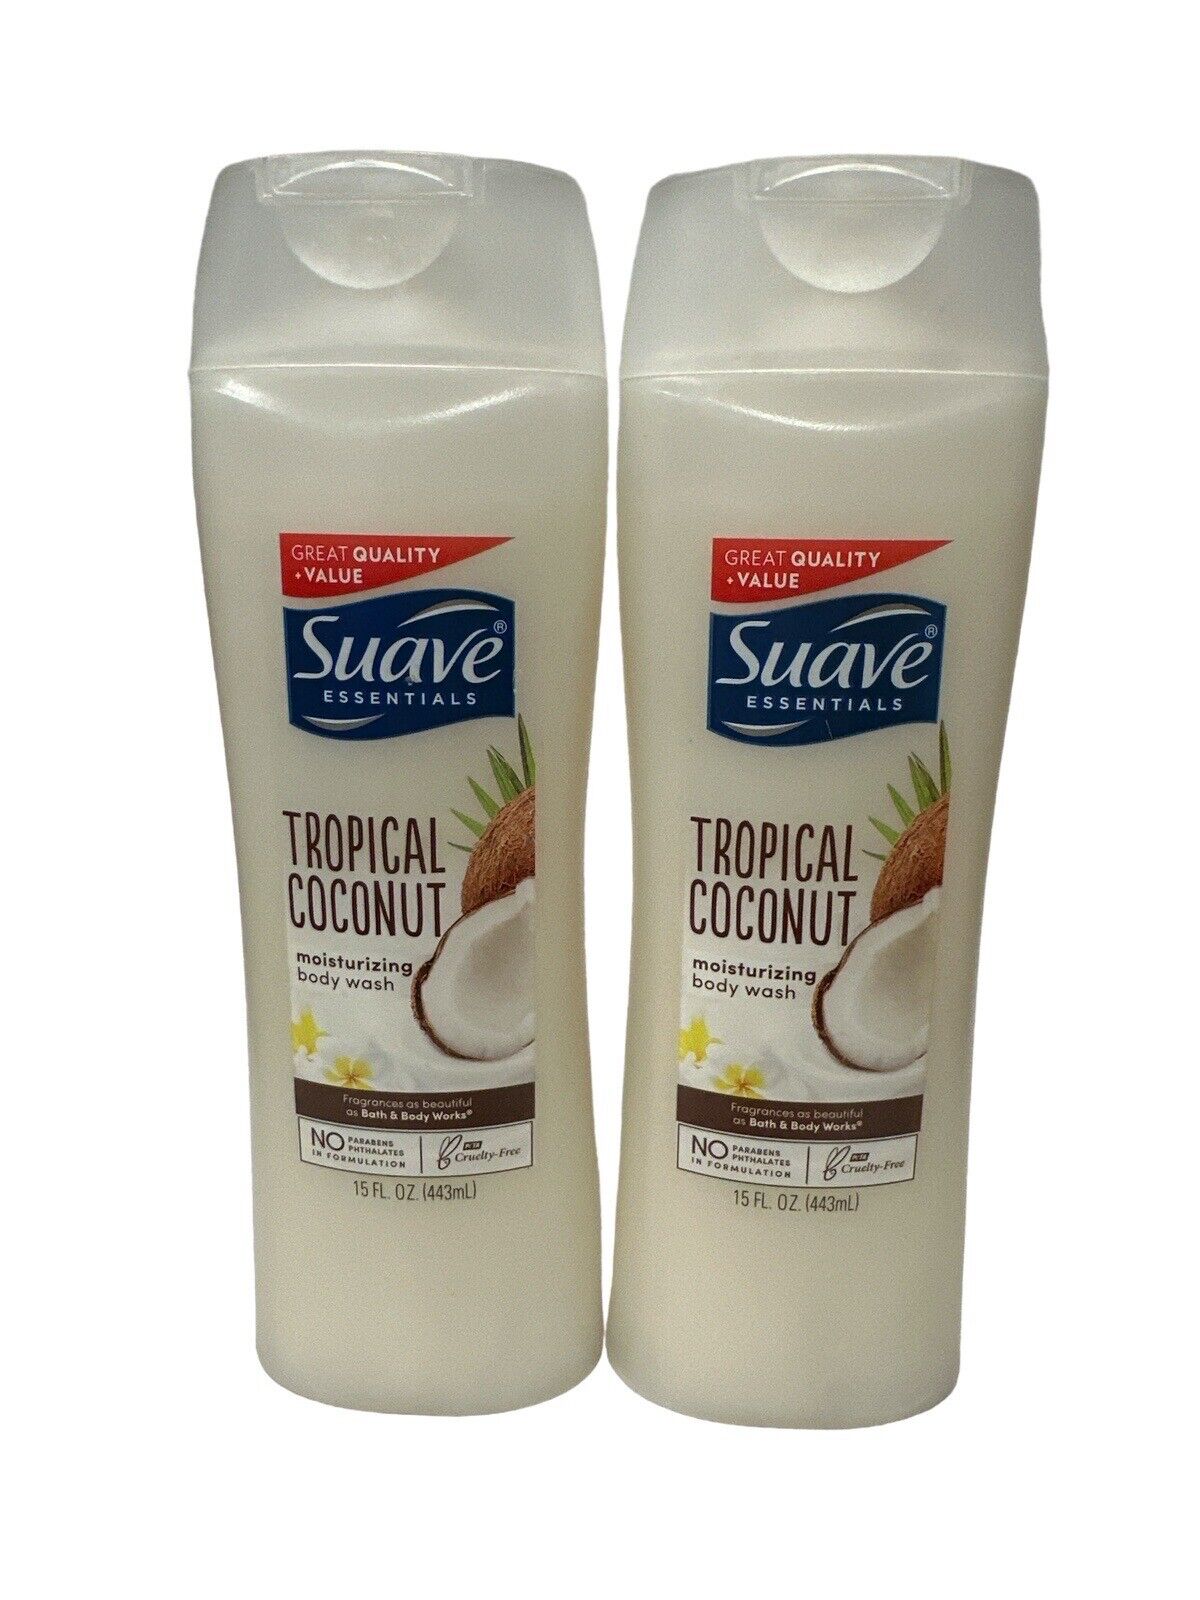 Suave Naturals Body Wash - Tropical Coconut, 15Oz - 2 Pack